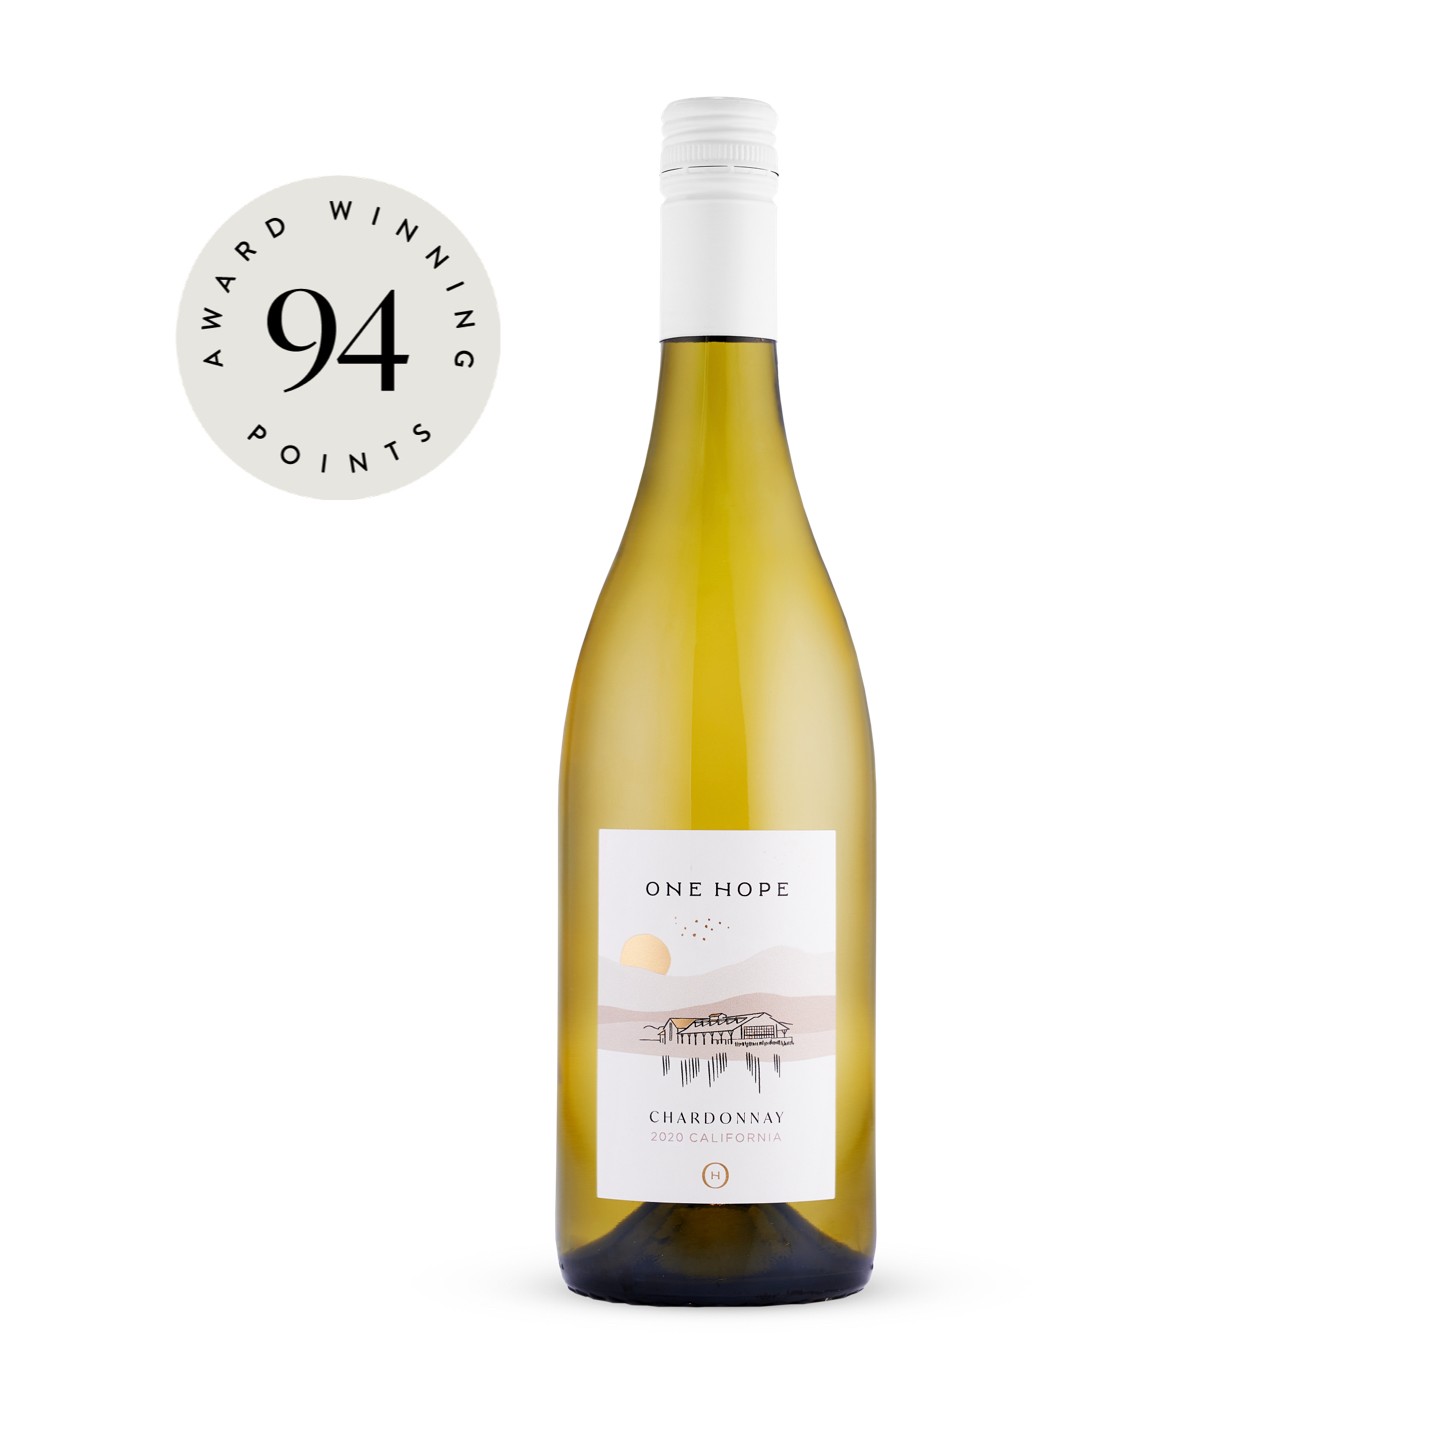 Shop our Best Selling Chardonnay at ONEHOPE